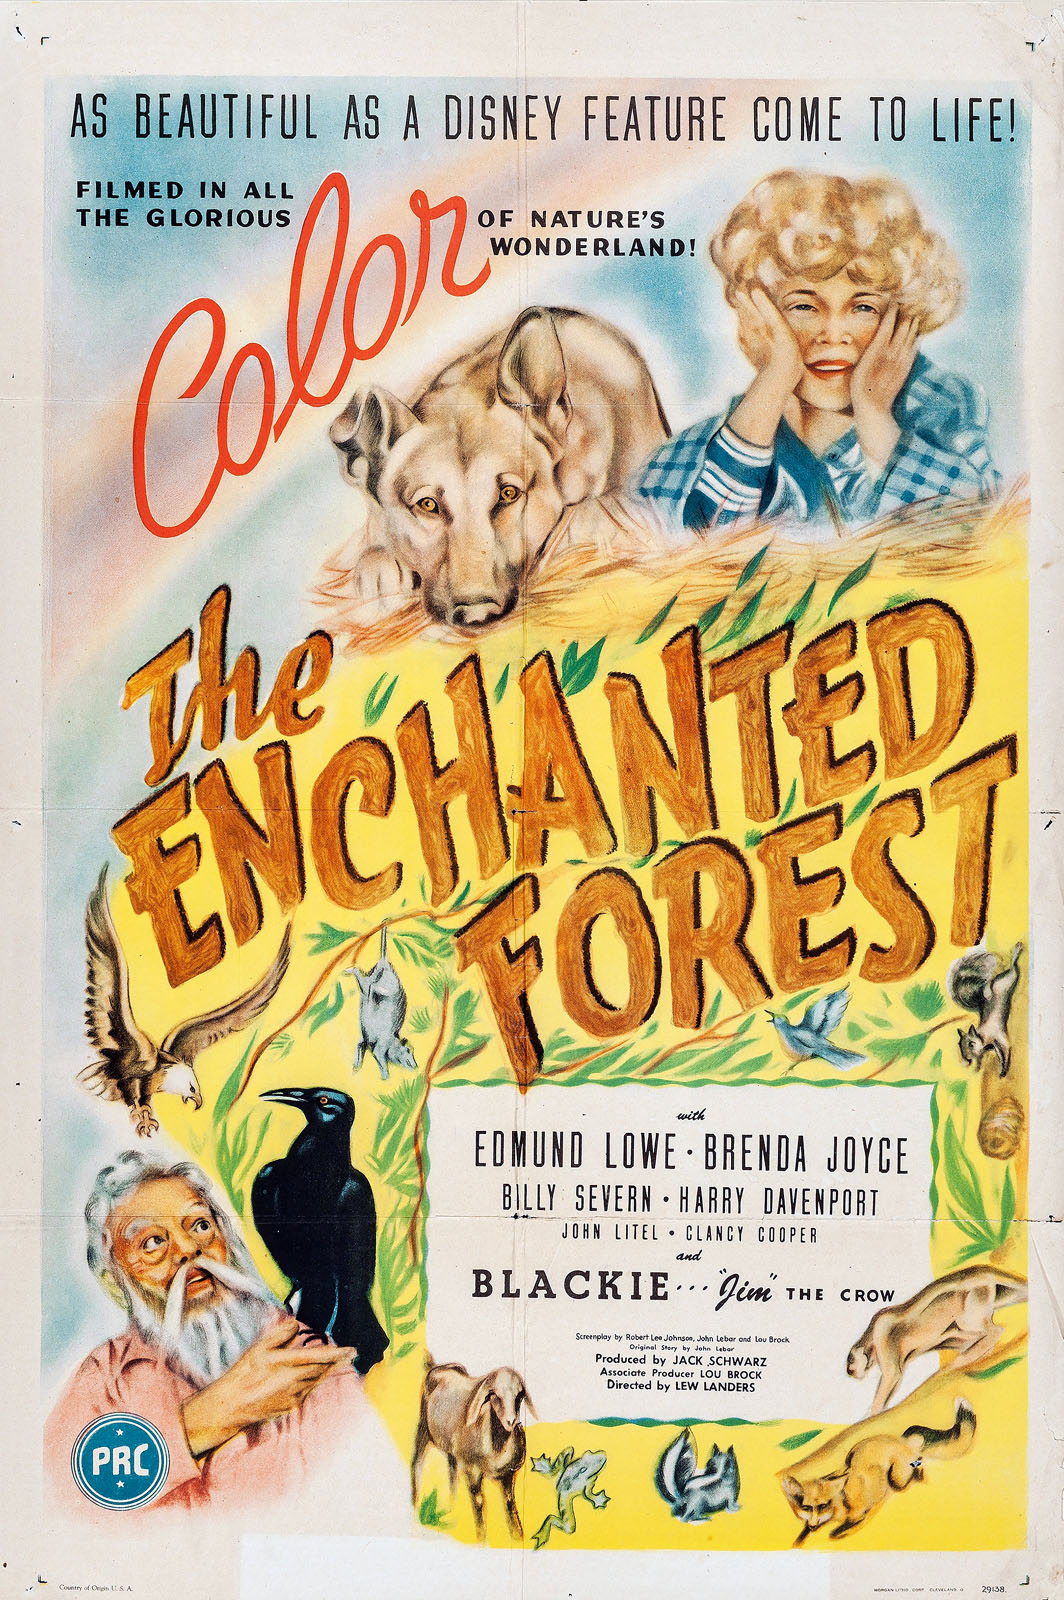 ENCHANTED FOREST, THE